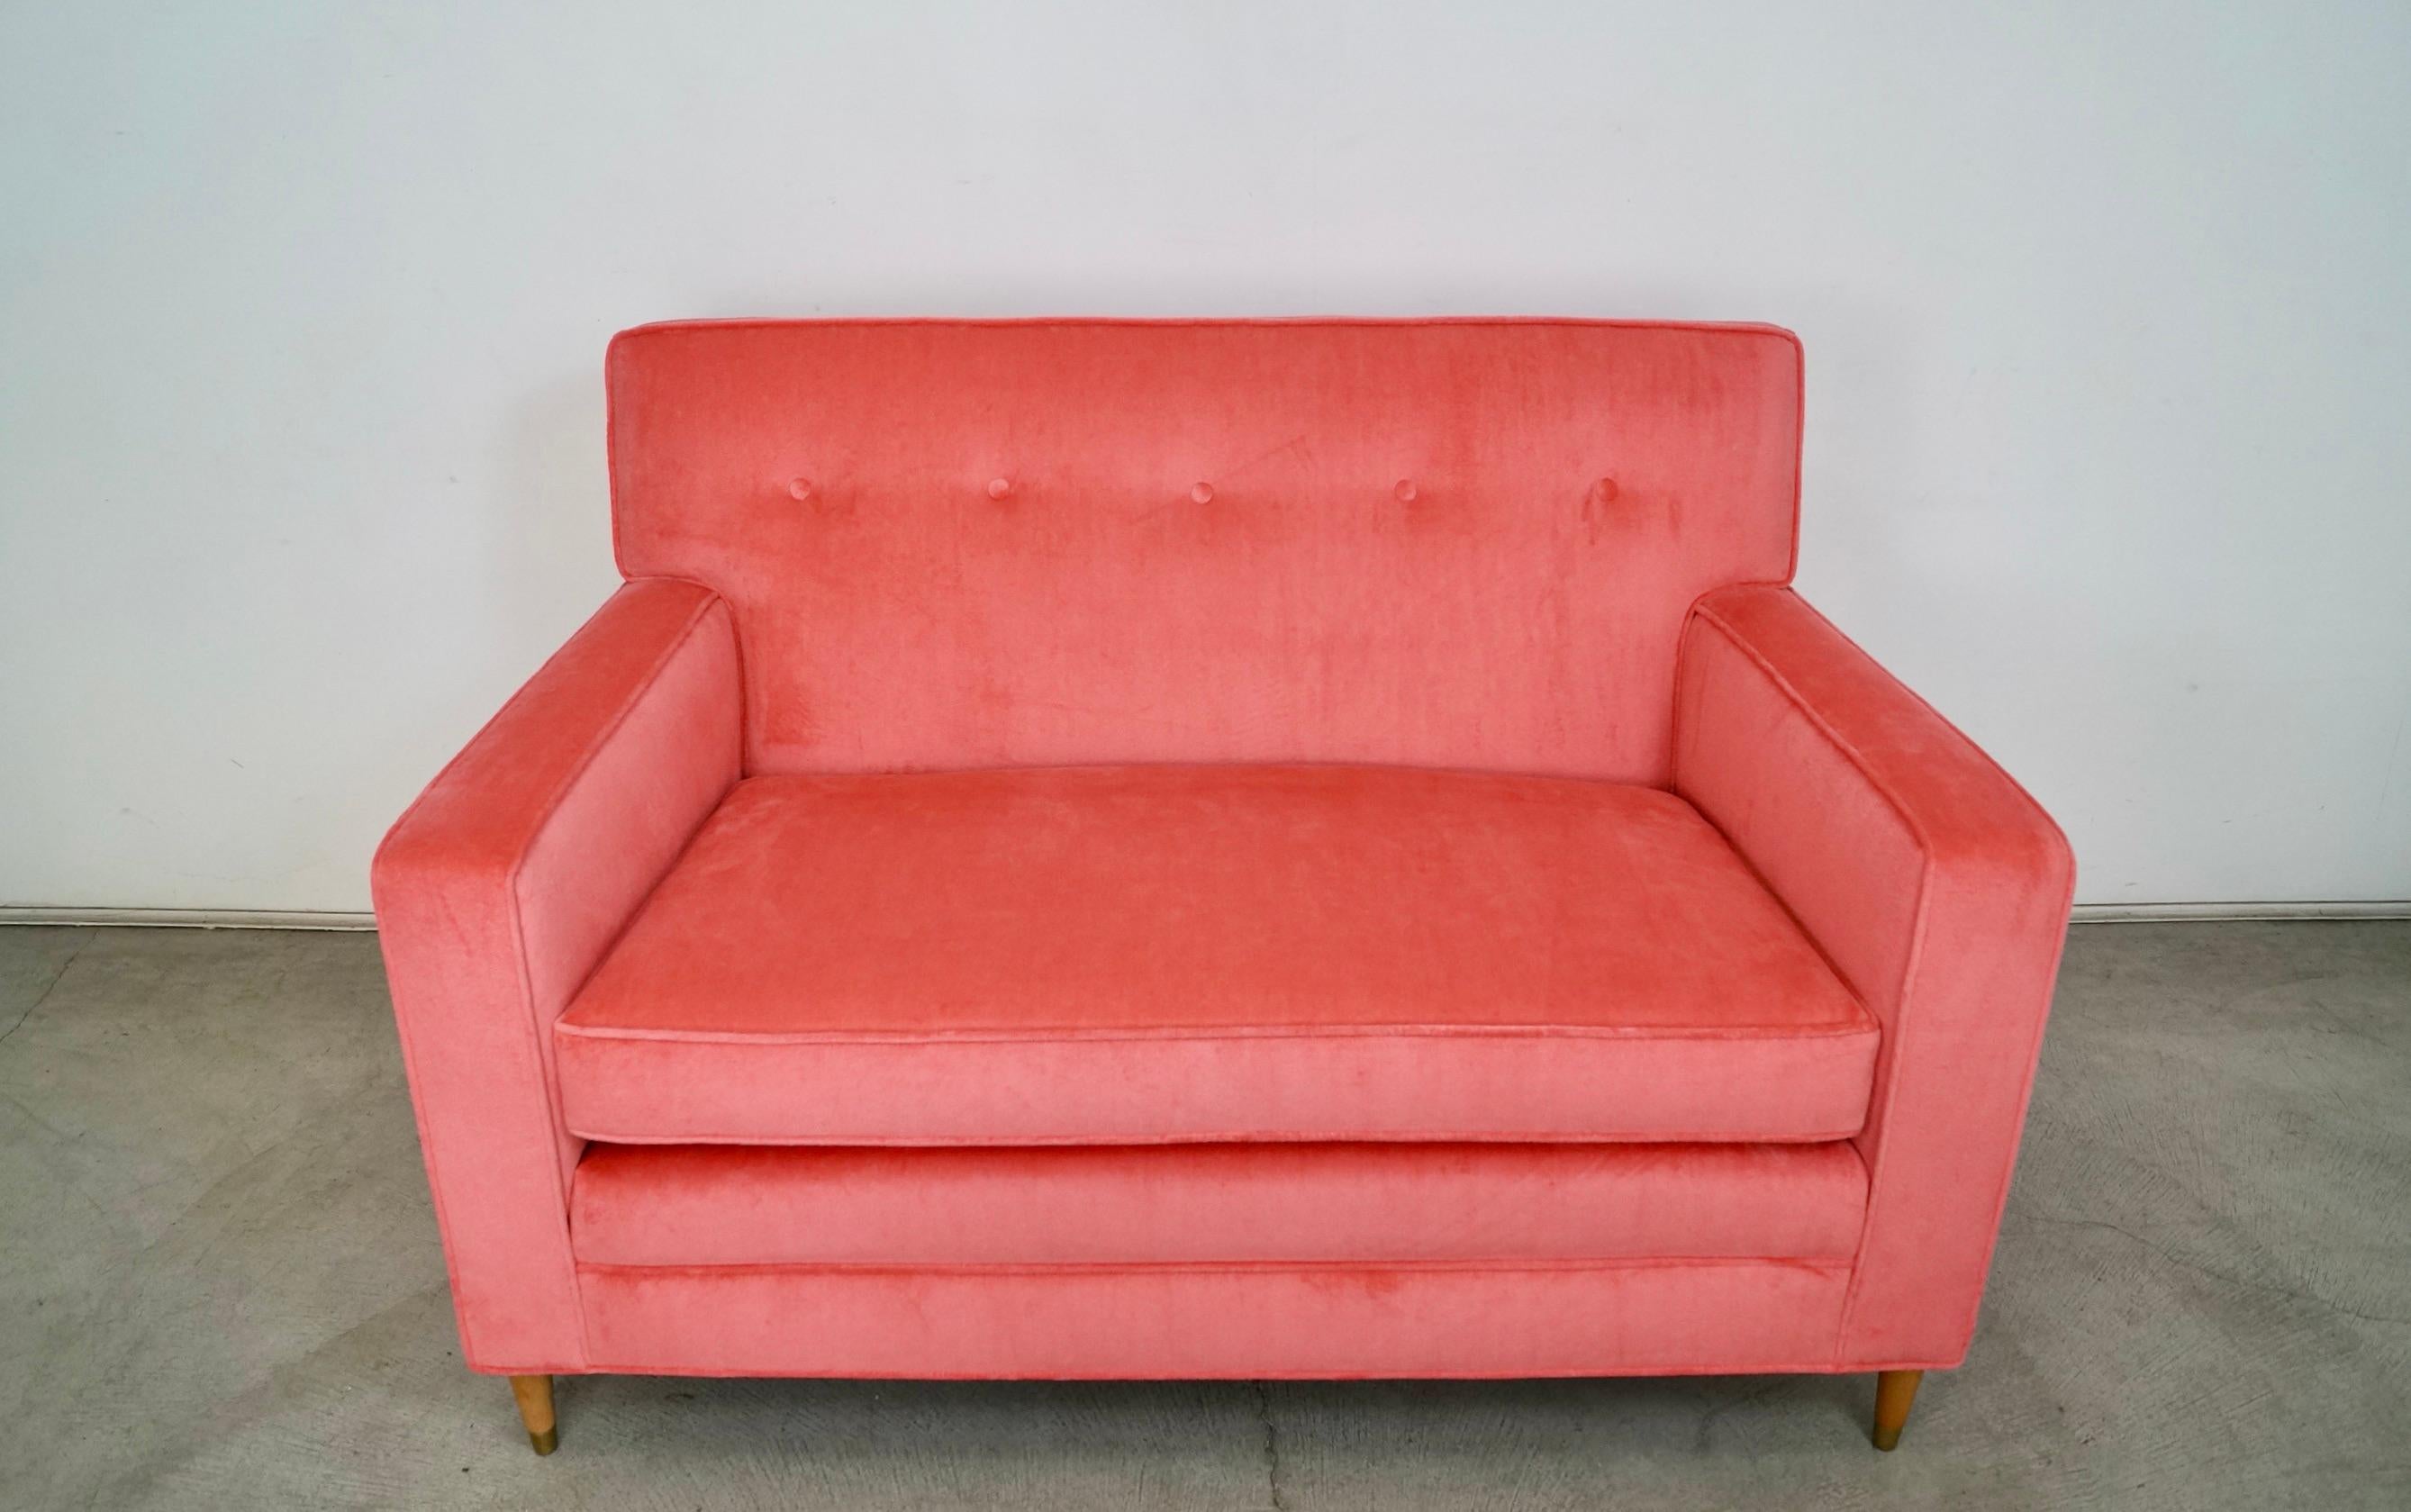 Gorgeous original Hollywood Regency Midcentury Modern settee lounge couch for sale. Manufactured in the 1950's, and has been professionally reupholstered in new velvet and foam. The legs are solid oak, and have been refinished in a natural oak tone.